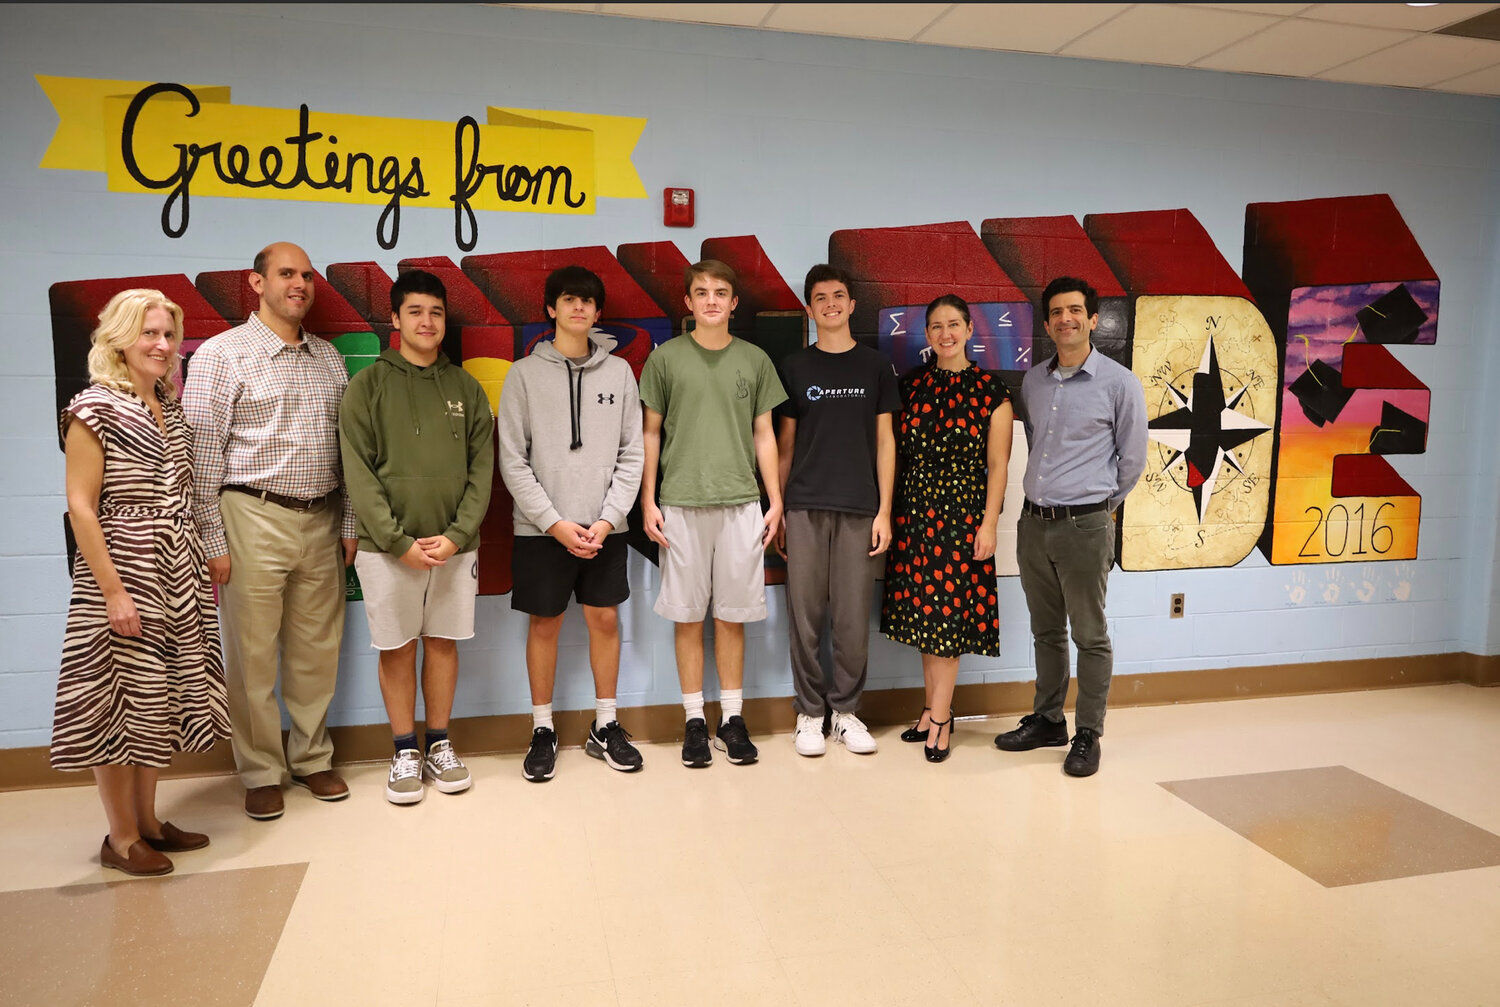 South Side High School music teacher Doreen Fryling, left, with band instructor Anthony Pomponio and All-State Conference seniors Paul Adal, Paul Marquardt, Owen Cashman, James Giangregorio, along with music teachers Katie Mark and Barry LeBron.